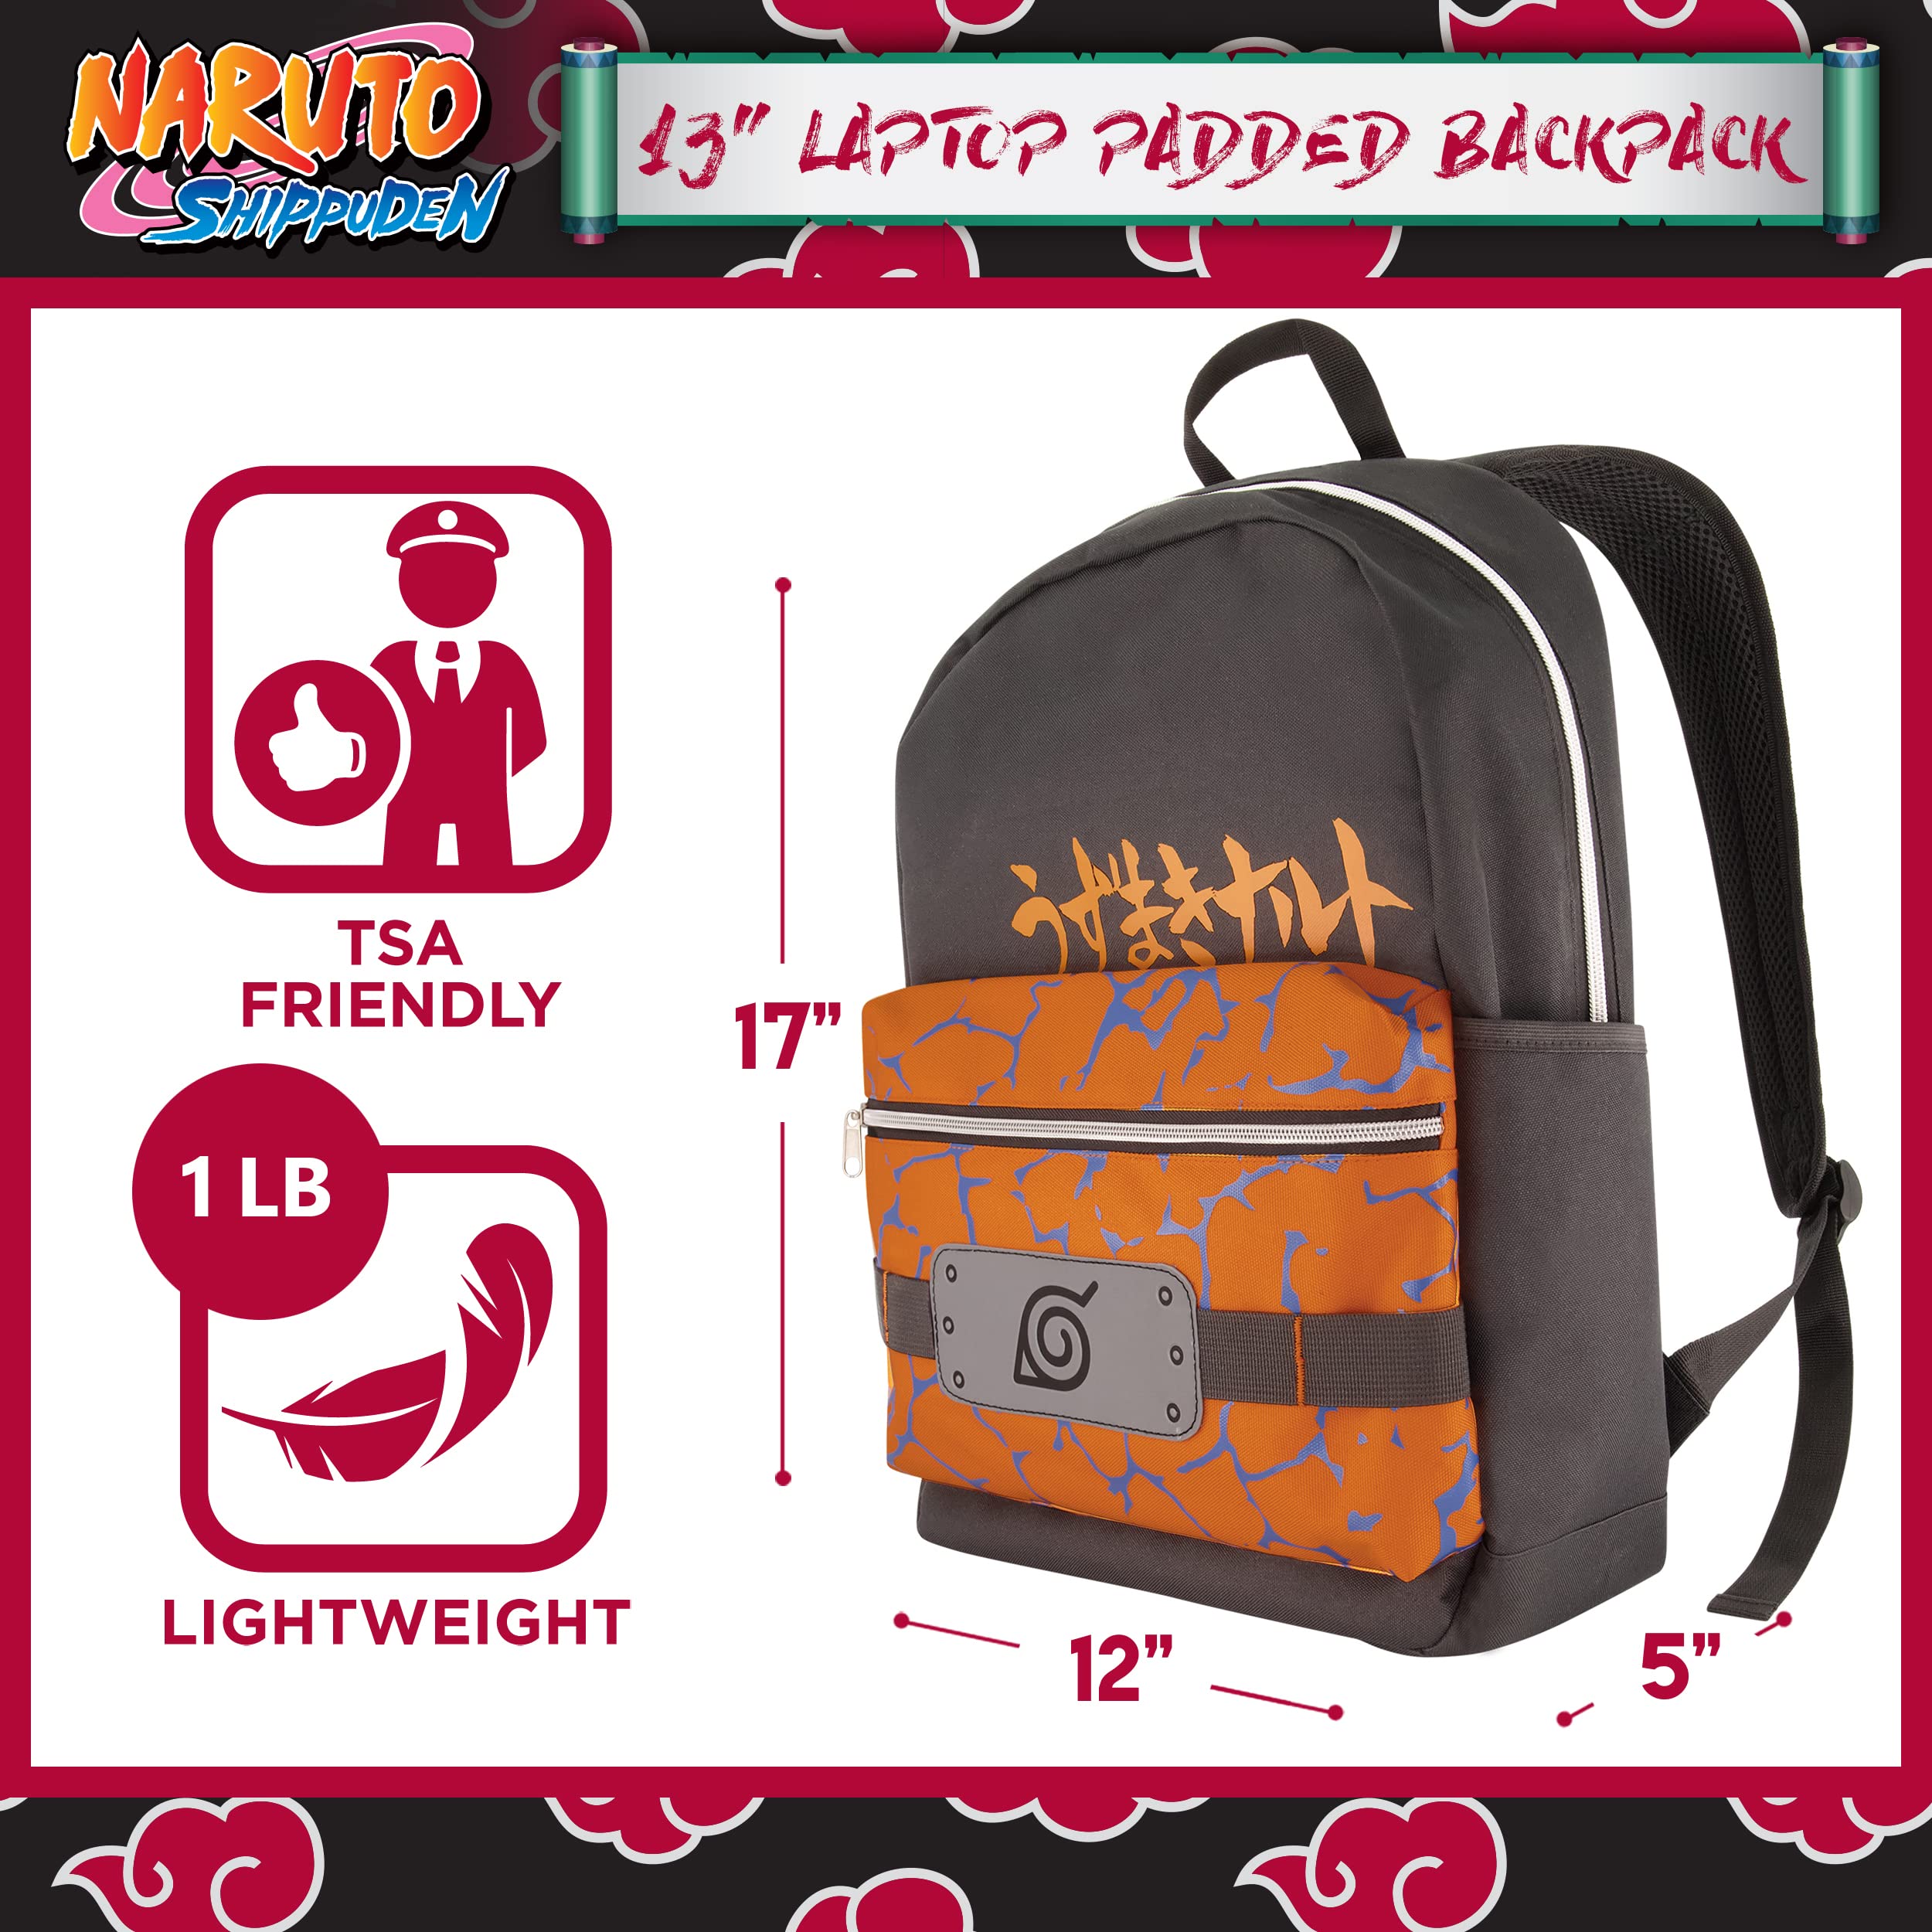 Naruto 13 Inch Sleeve Laptop Backpack, Padded Computer Bag for Commute or Travel, Shinobi Headband, One Size